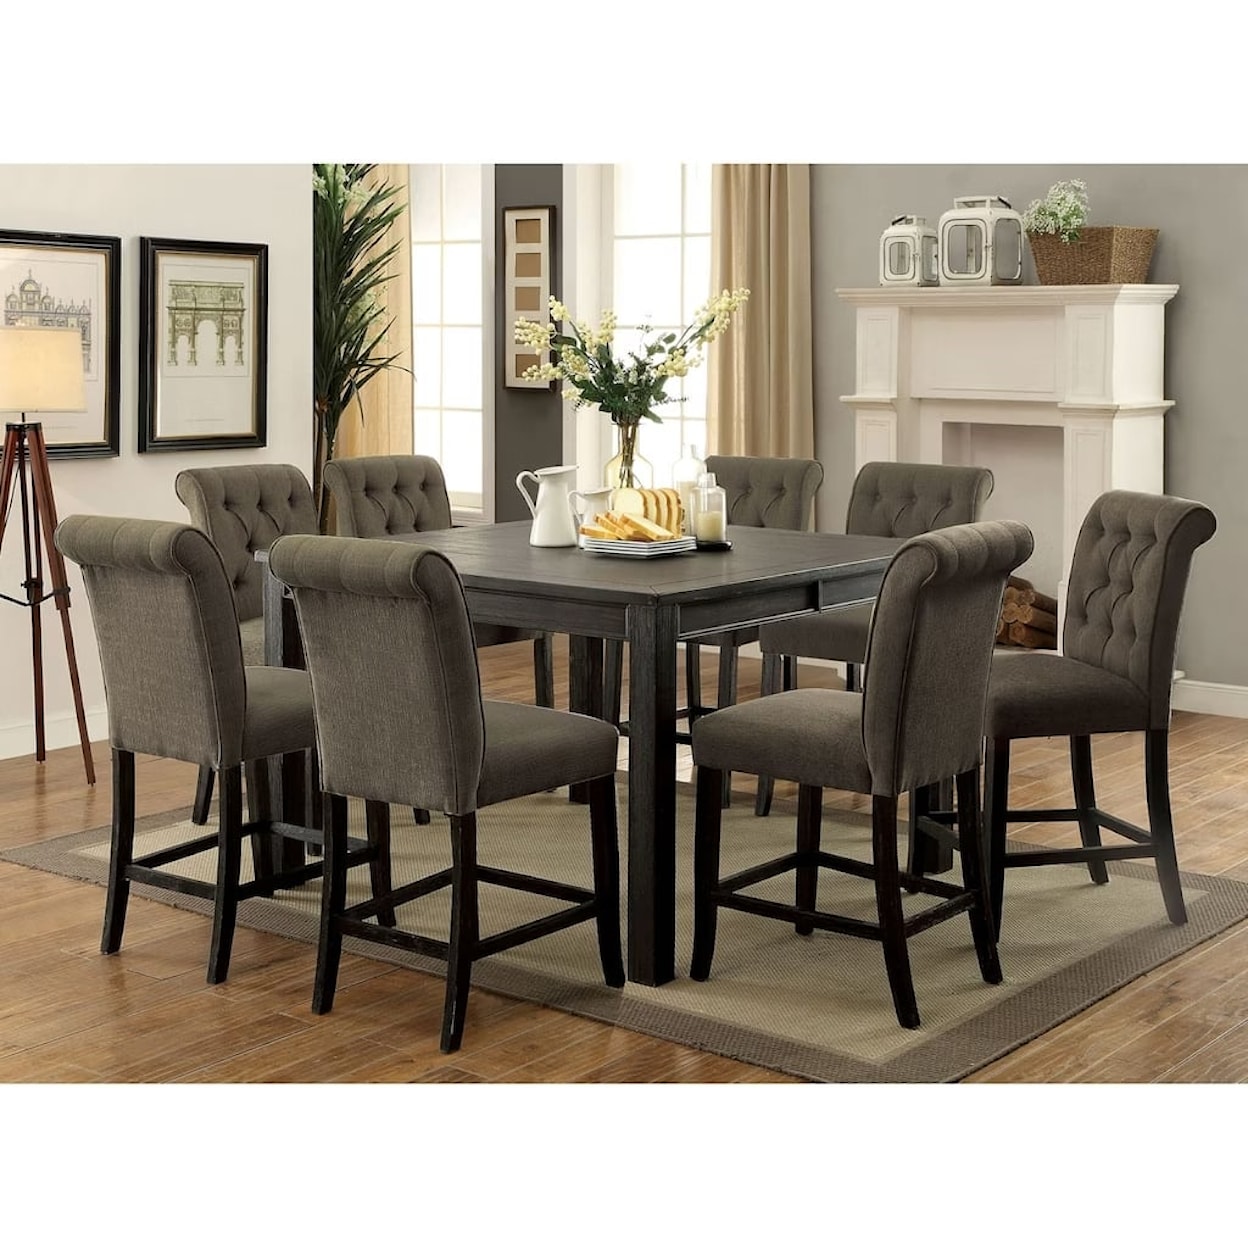 Furniture of America - FOA Sania III 7-Piece Counter Height Table and Chair Set